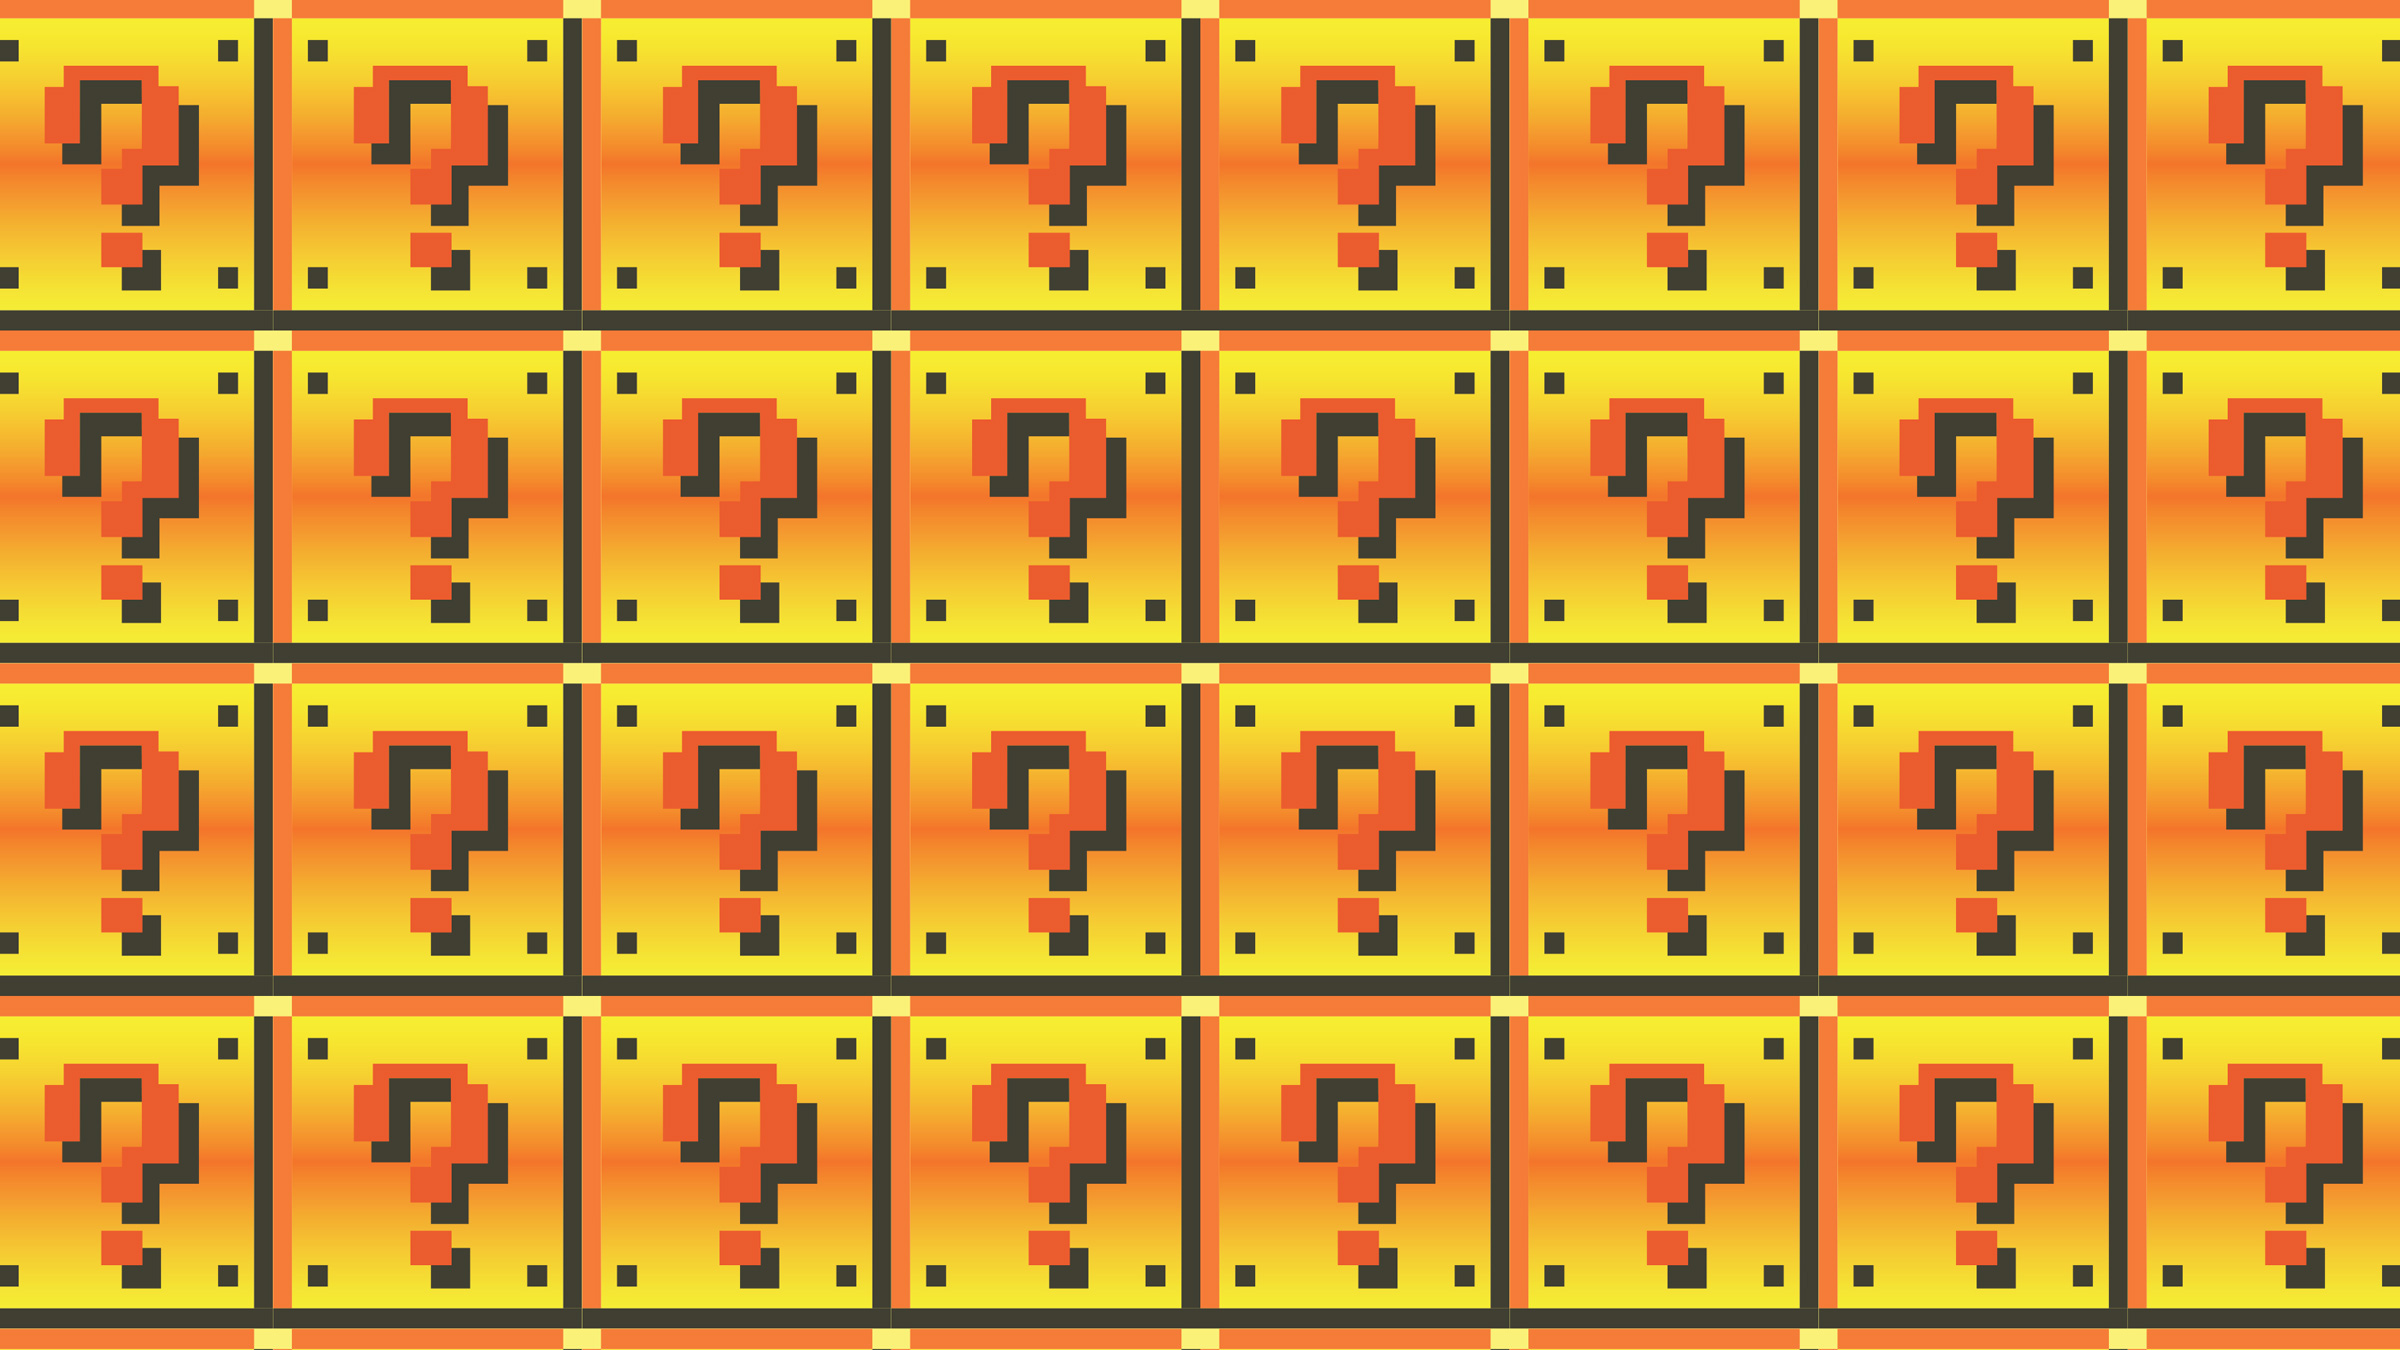 pattern of question marks, illustration